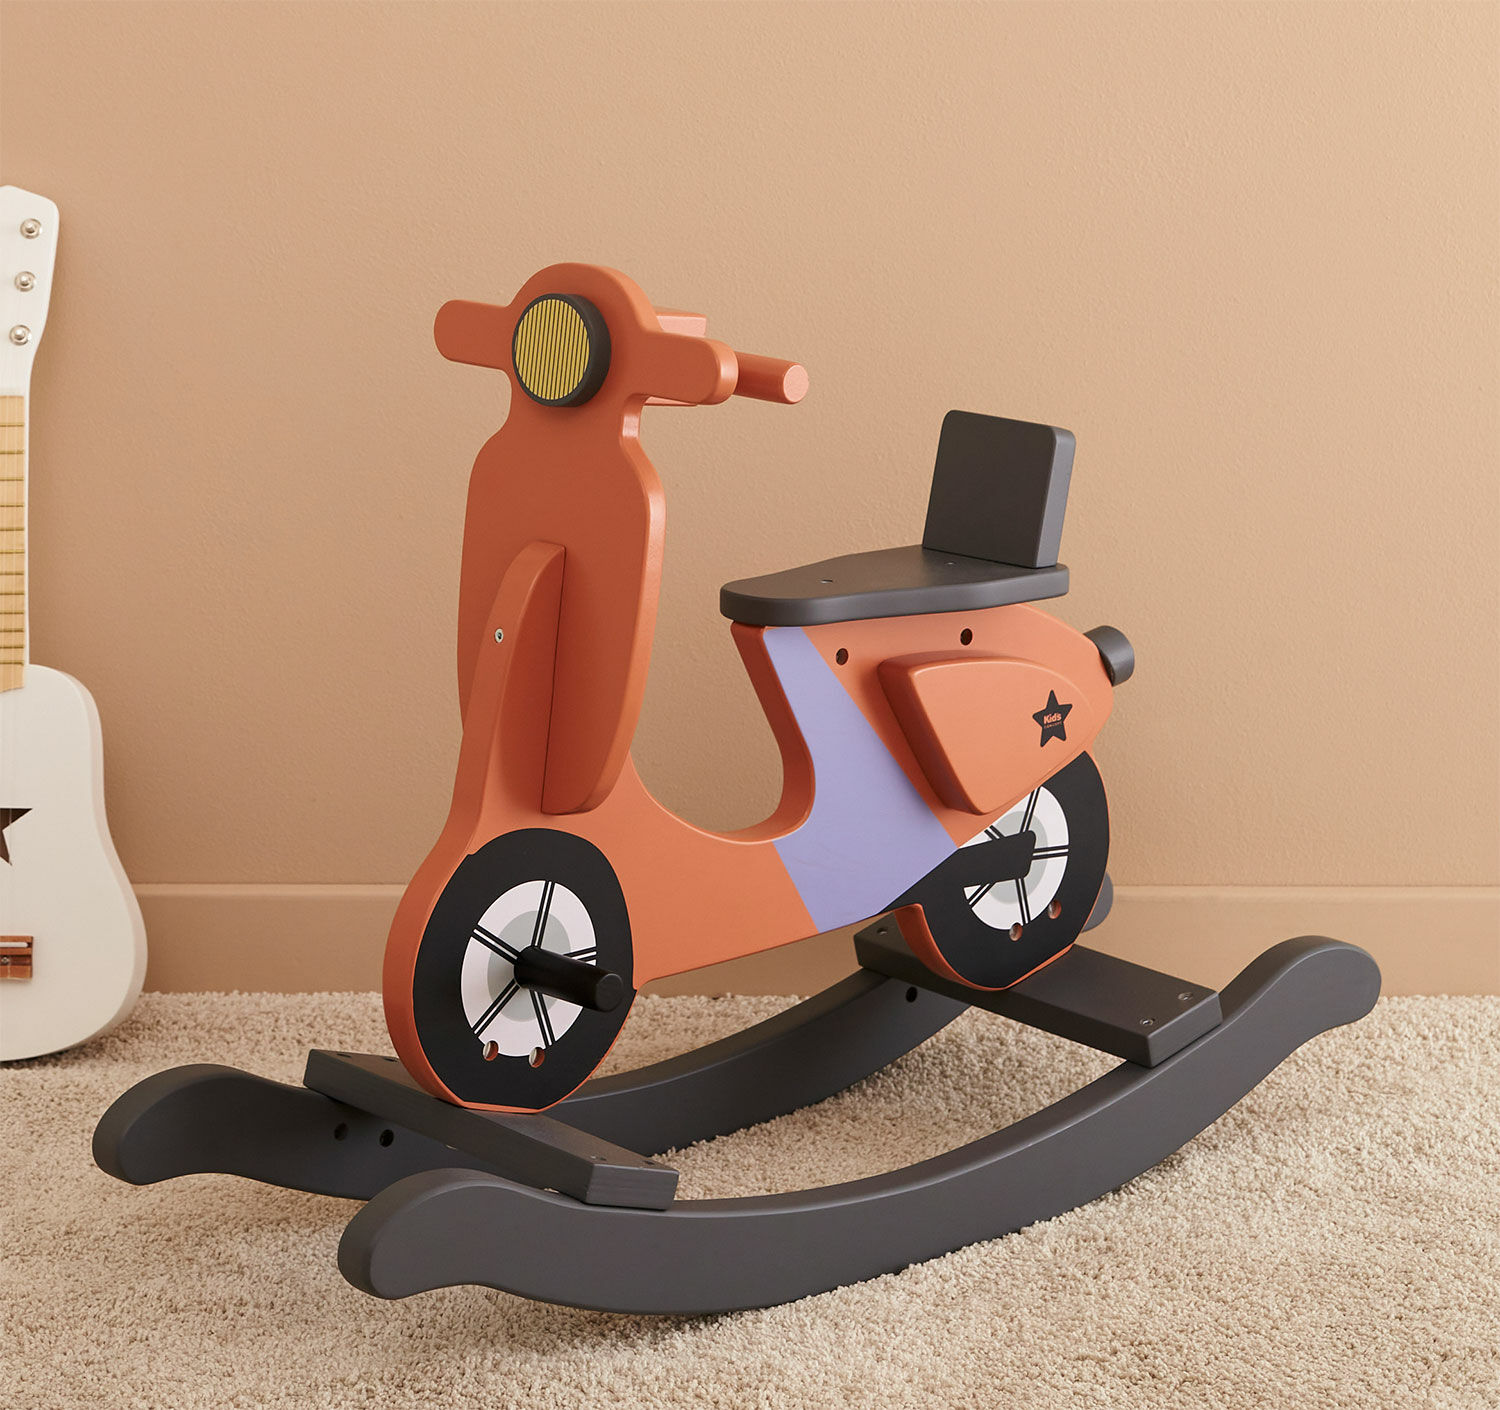 "Rocking Scooter Rust Red" (for children aged 18 months and older) by Kid's Concept